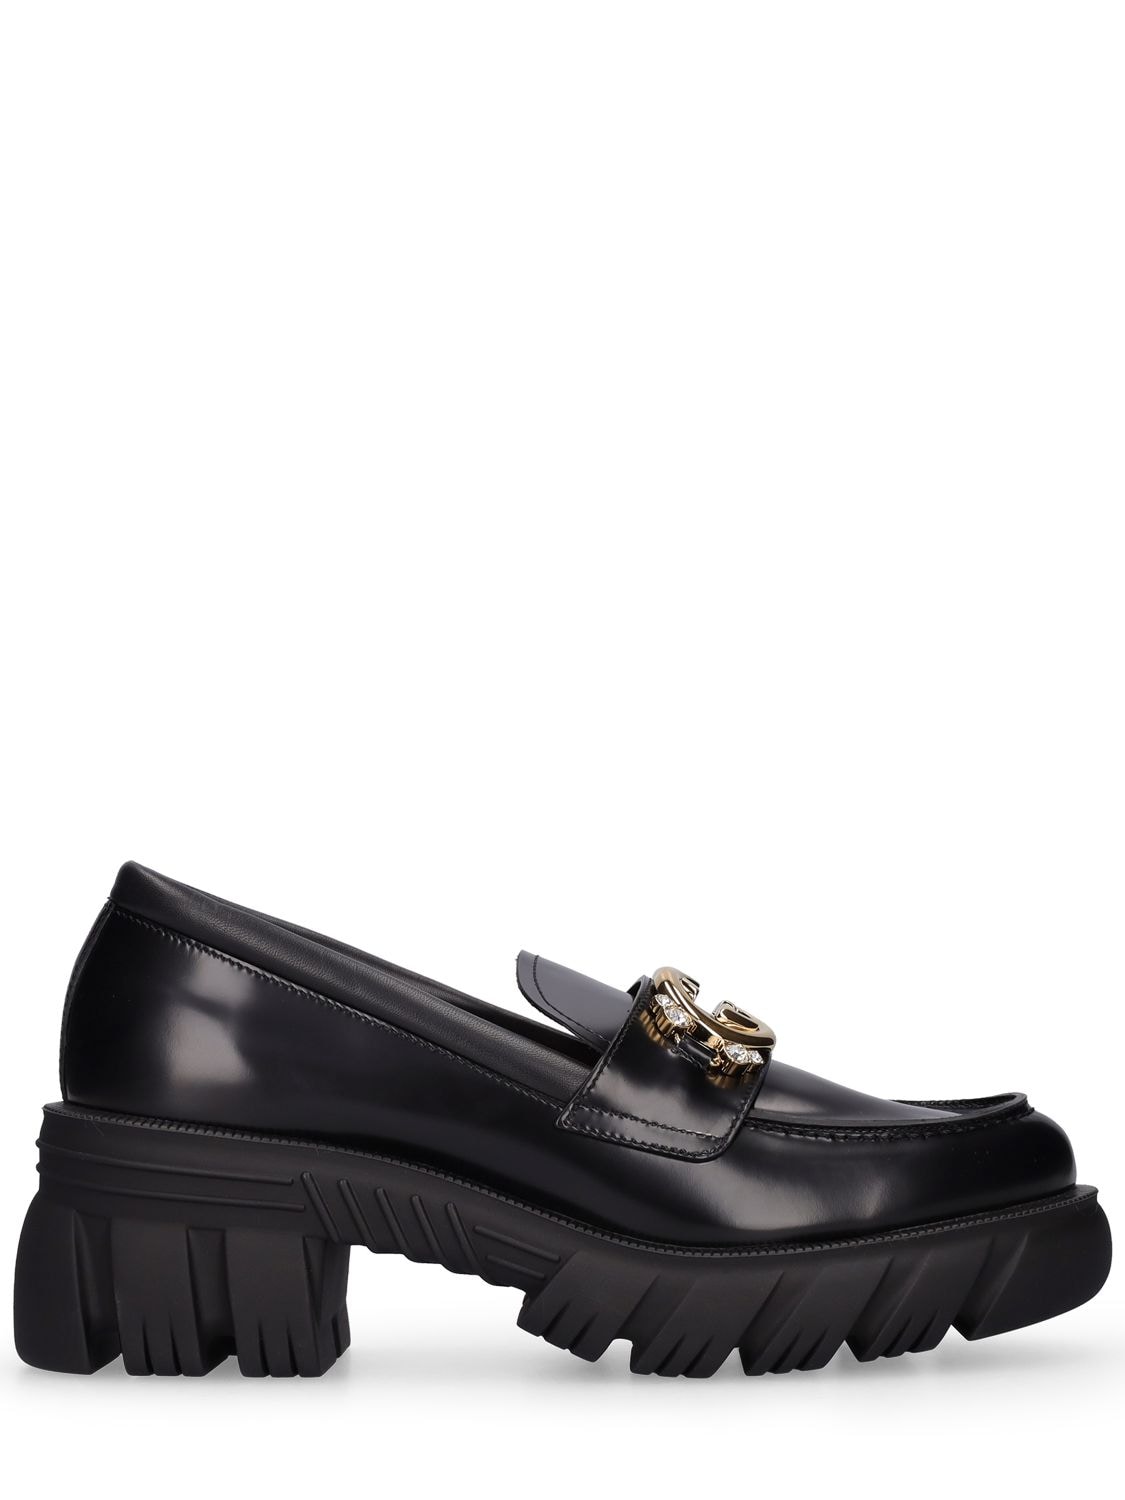 GUCCI 40mm Romance Leather Loafers